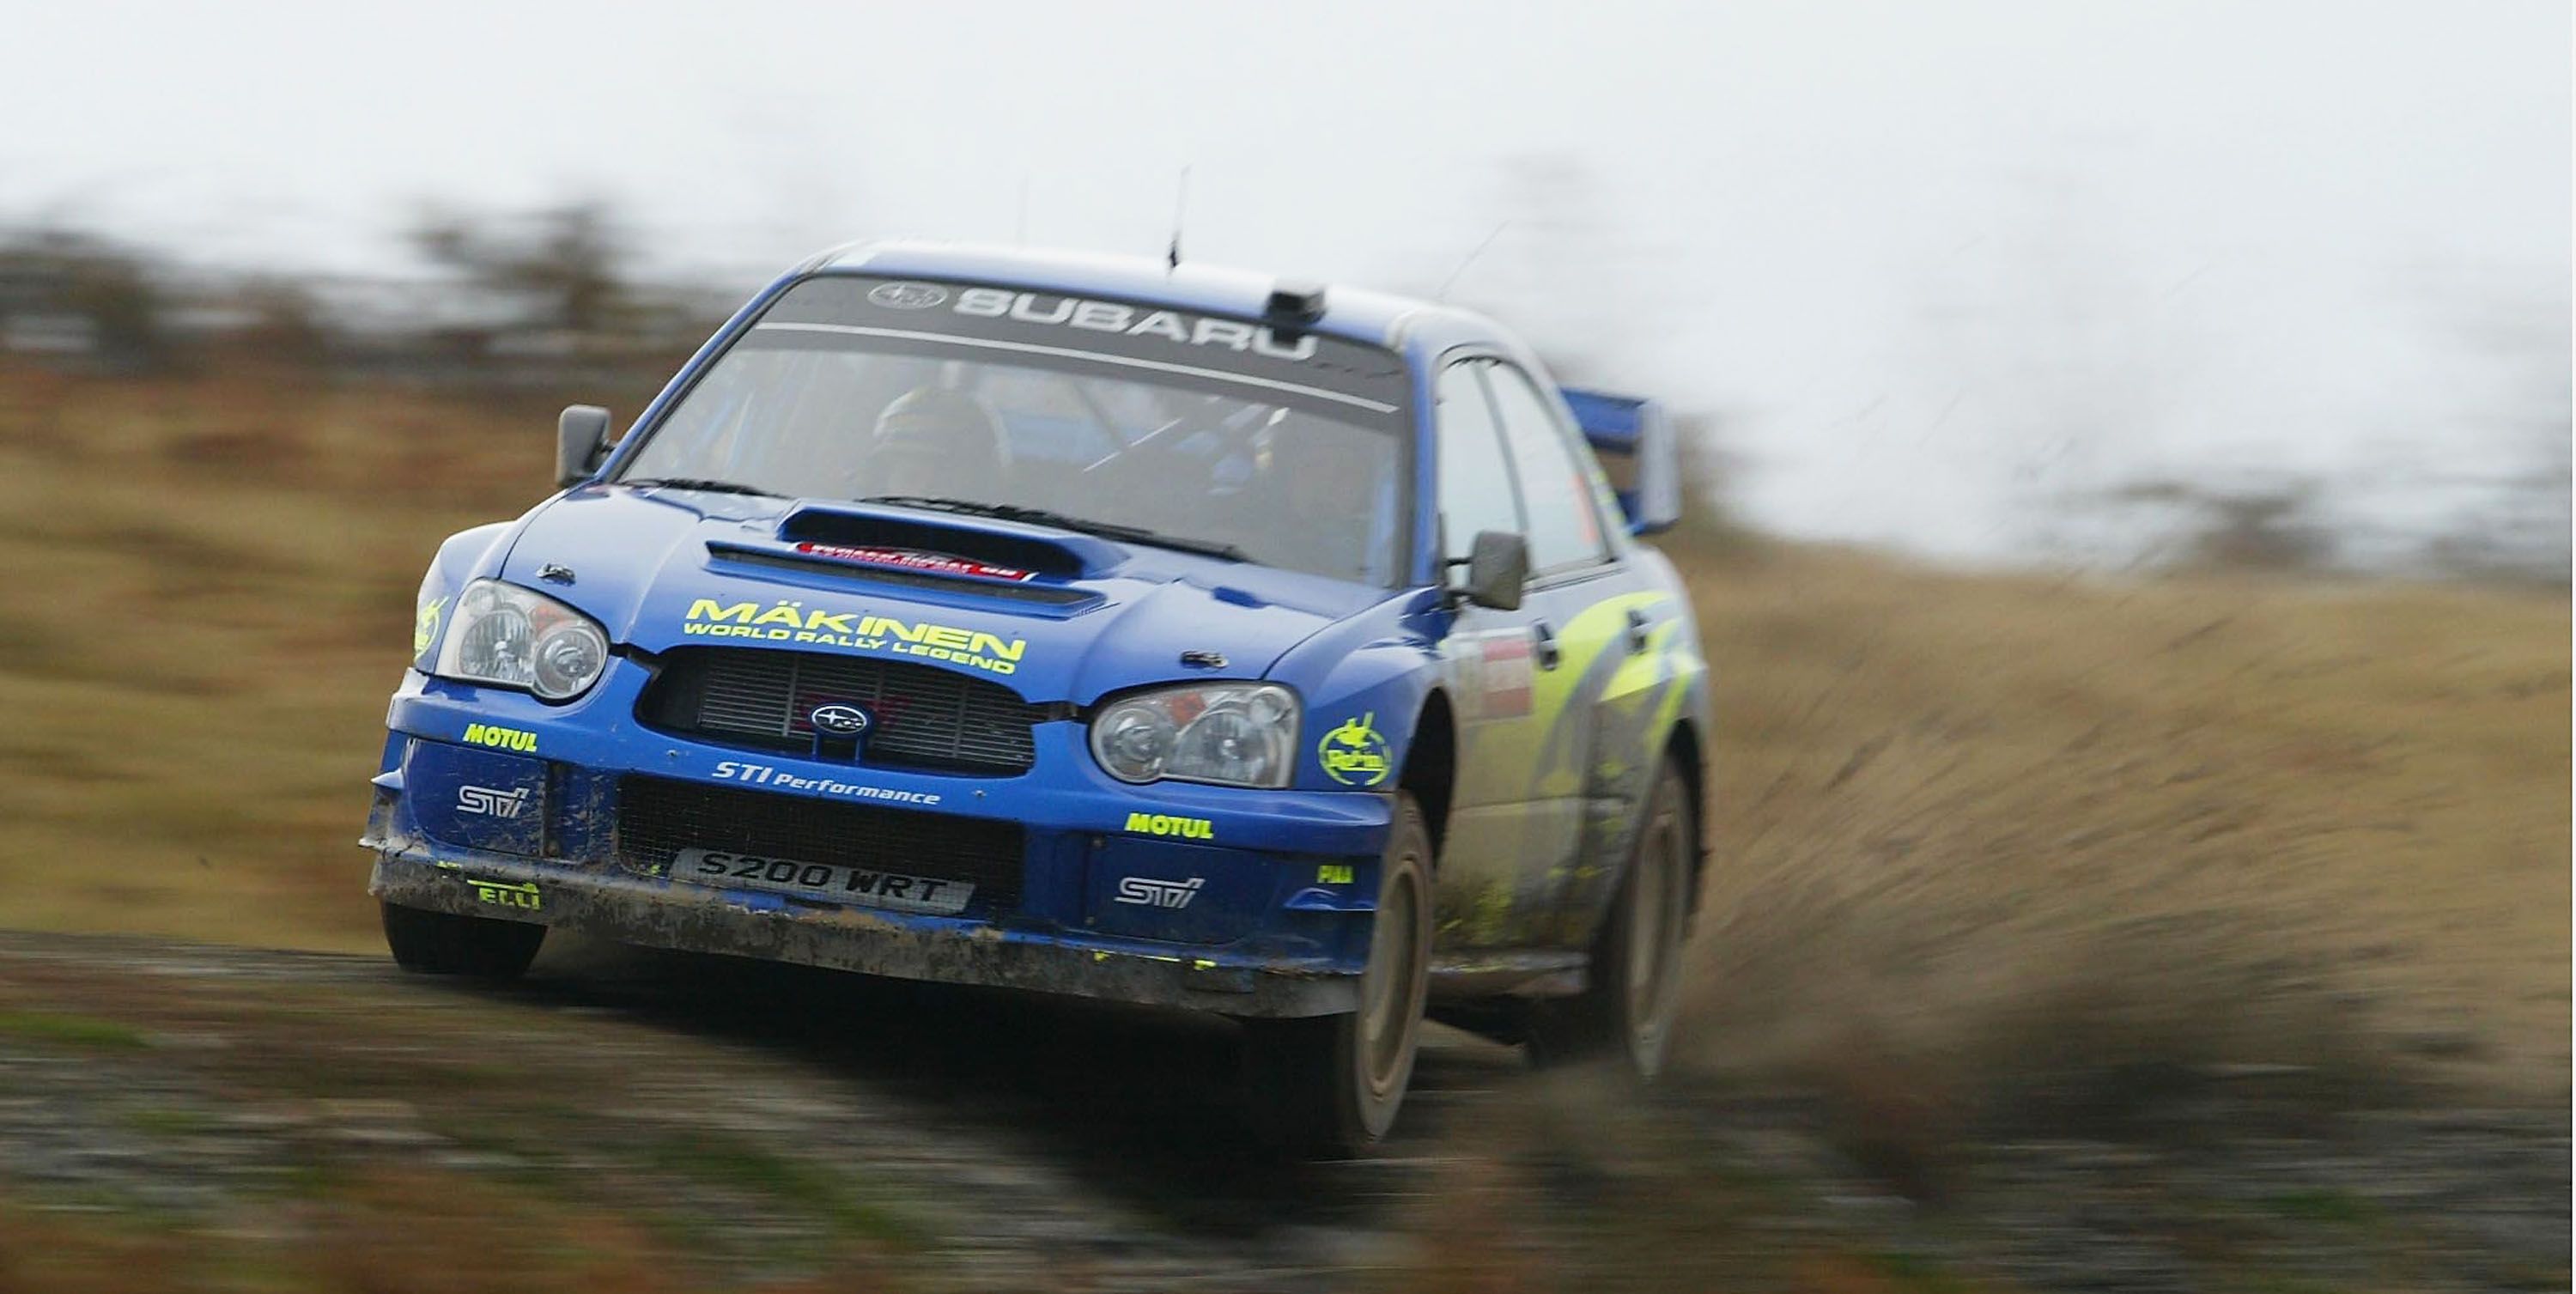 FIA President Hints at Subaru Return to WRC After 15 Years